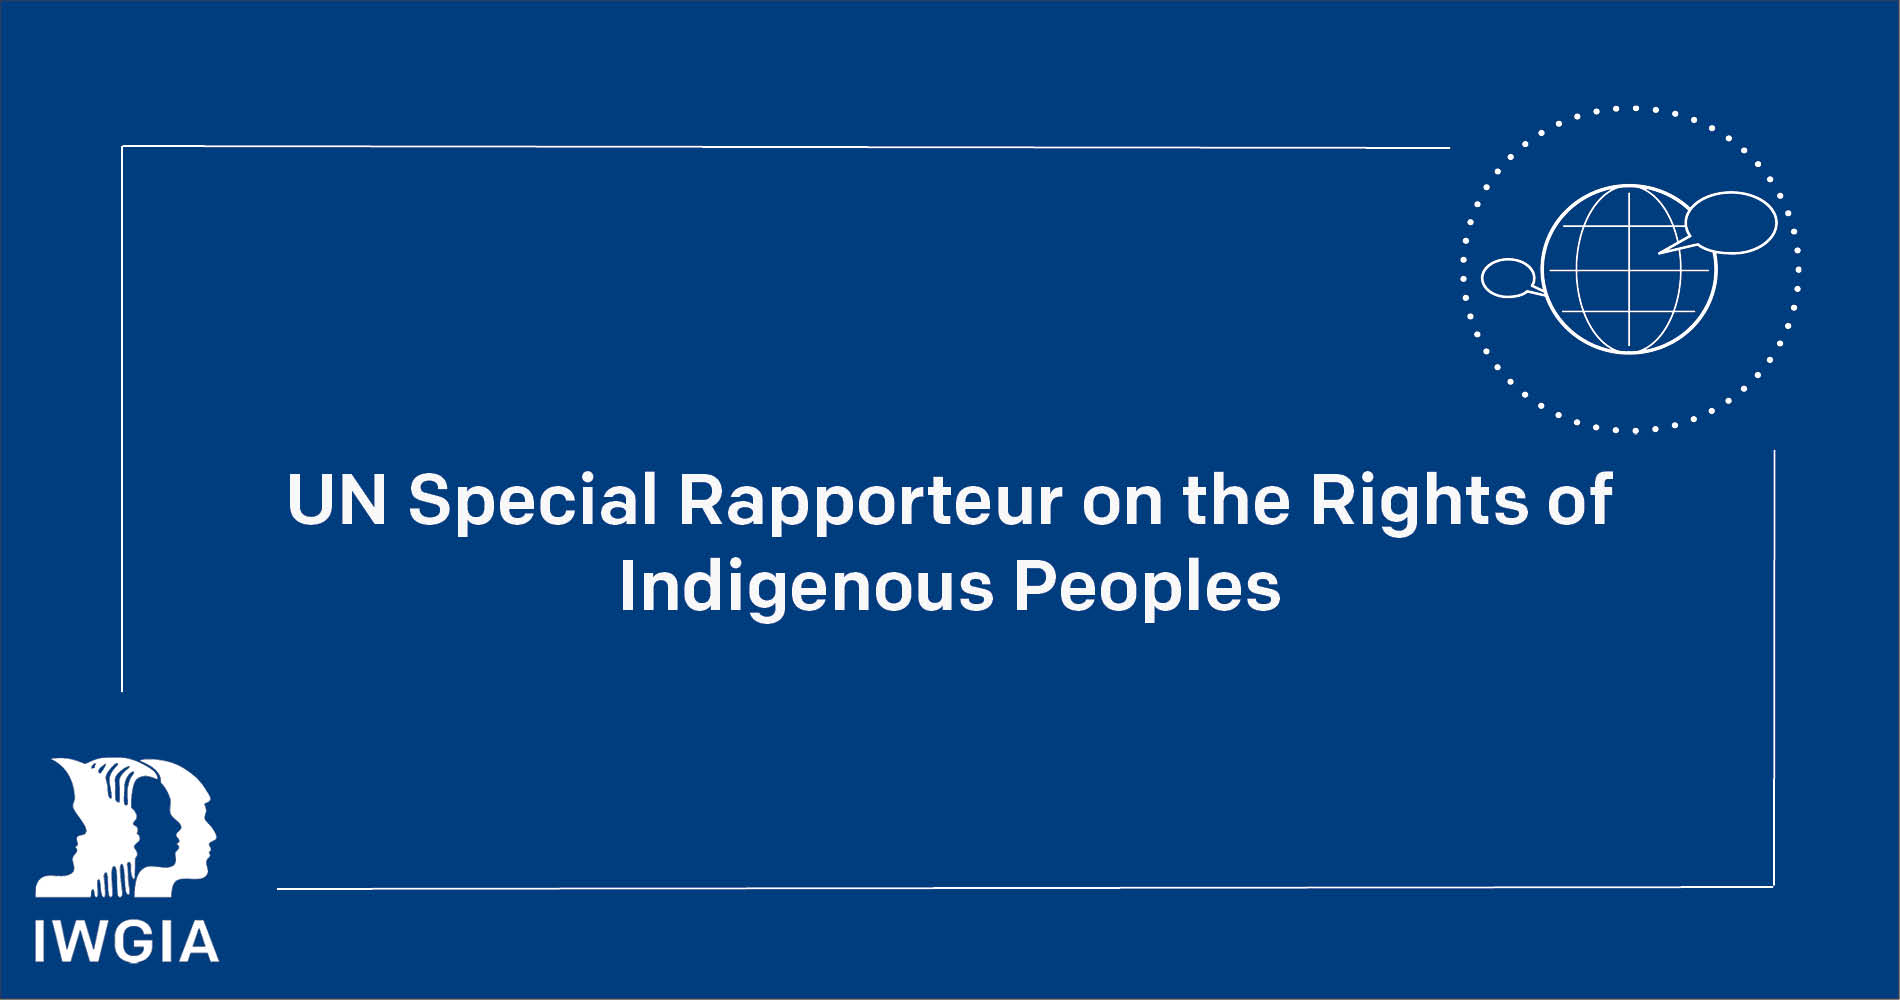 UN Special Rapporteur on the Rights of Indigenous Peoples